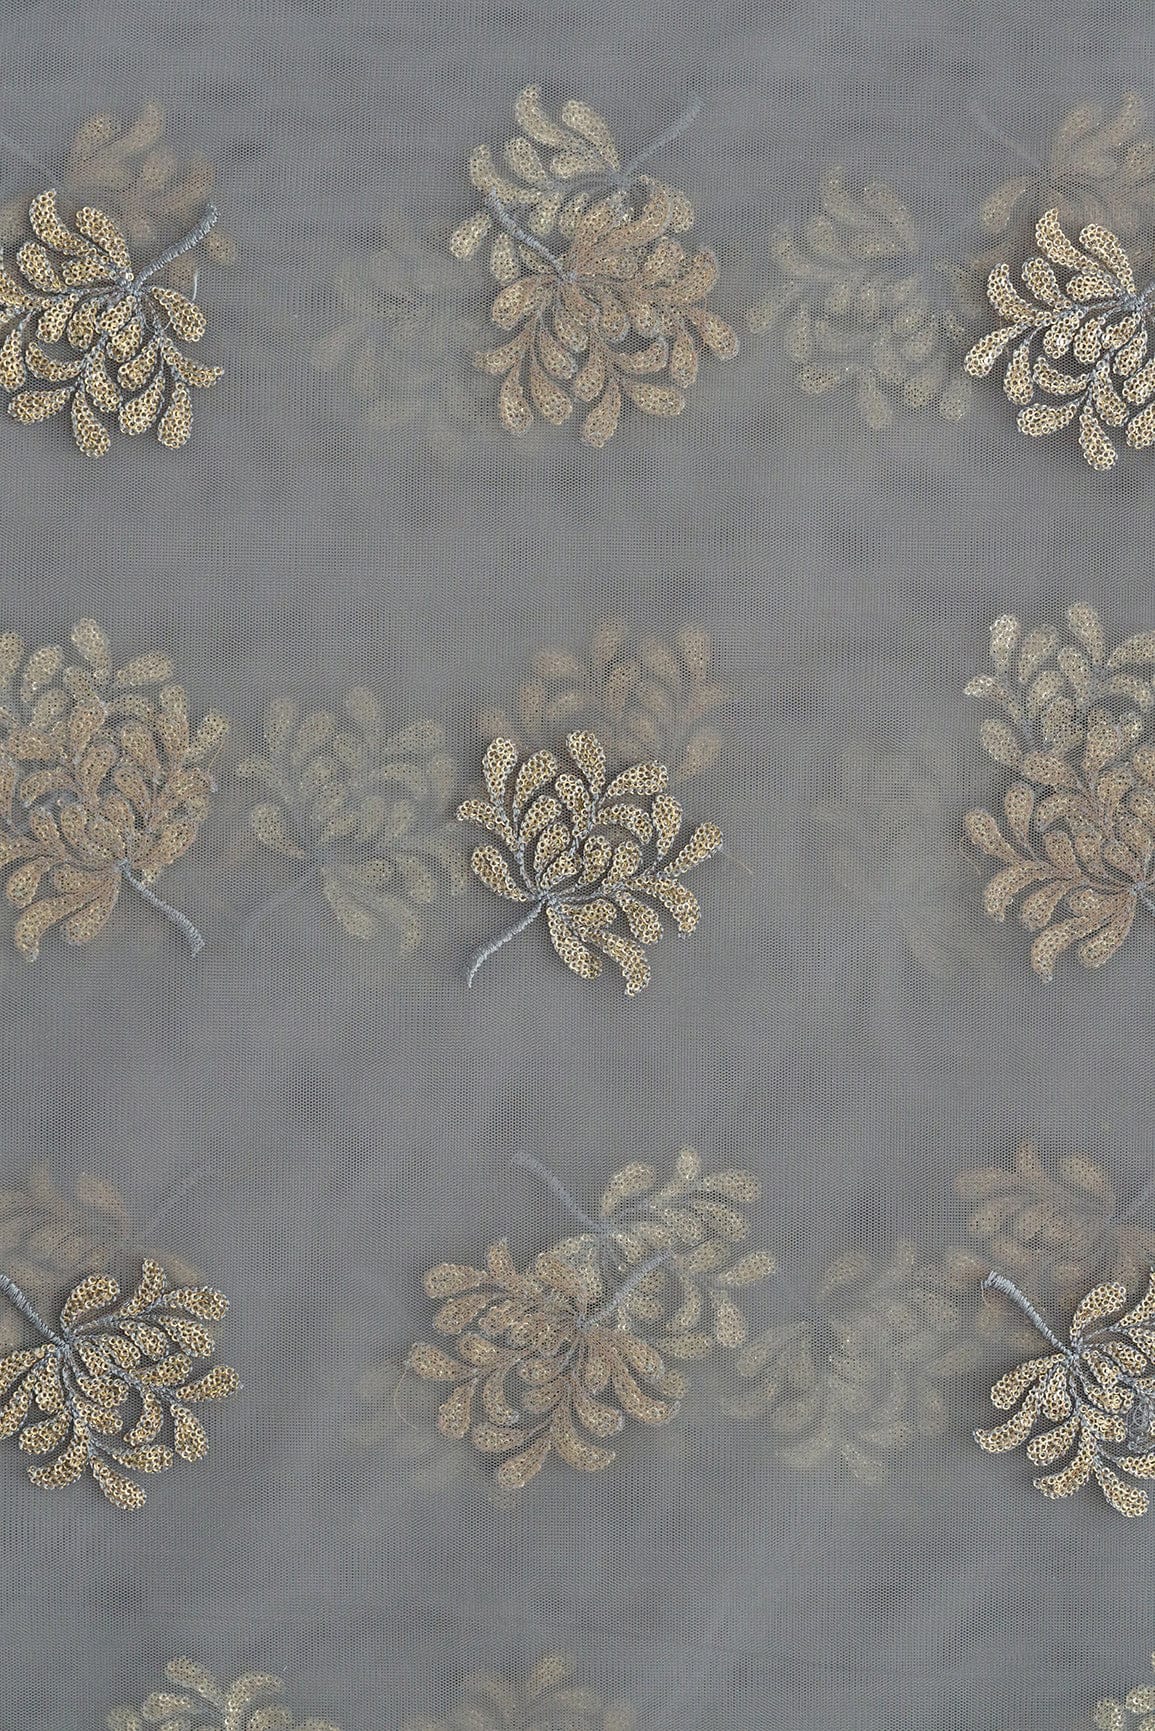 doeraa Embroidery Fabrics Grey Thread With Gold Sequins Beautiful Floral Embroidery Work On Grey Soft Net Fabric